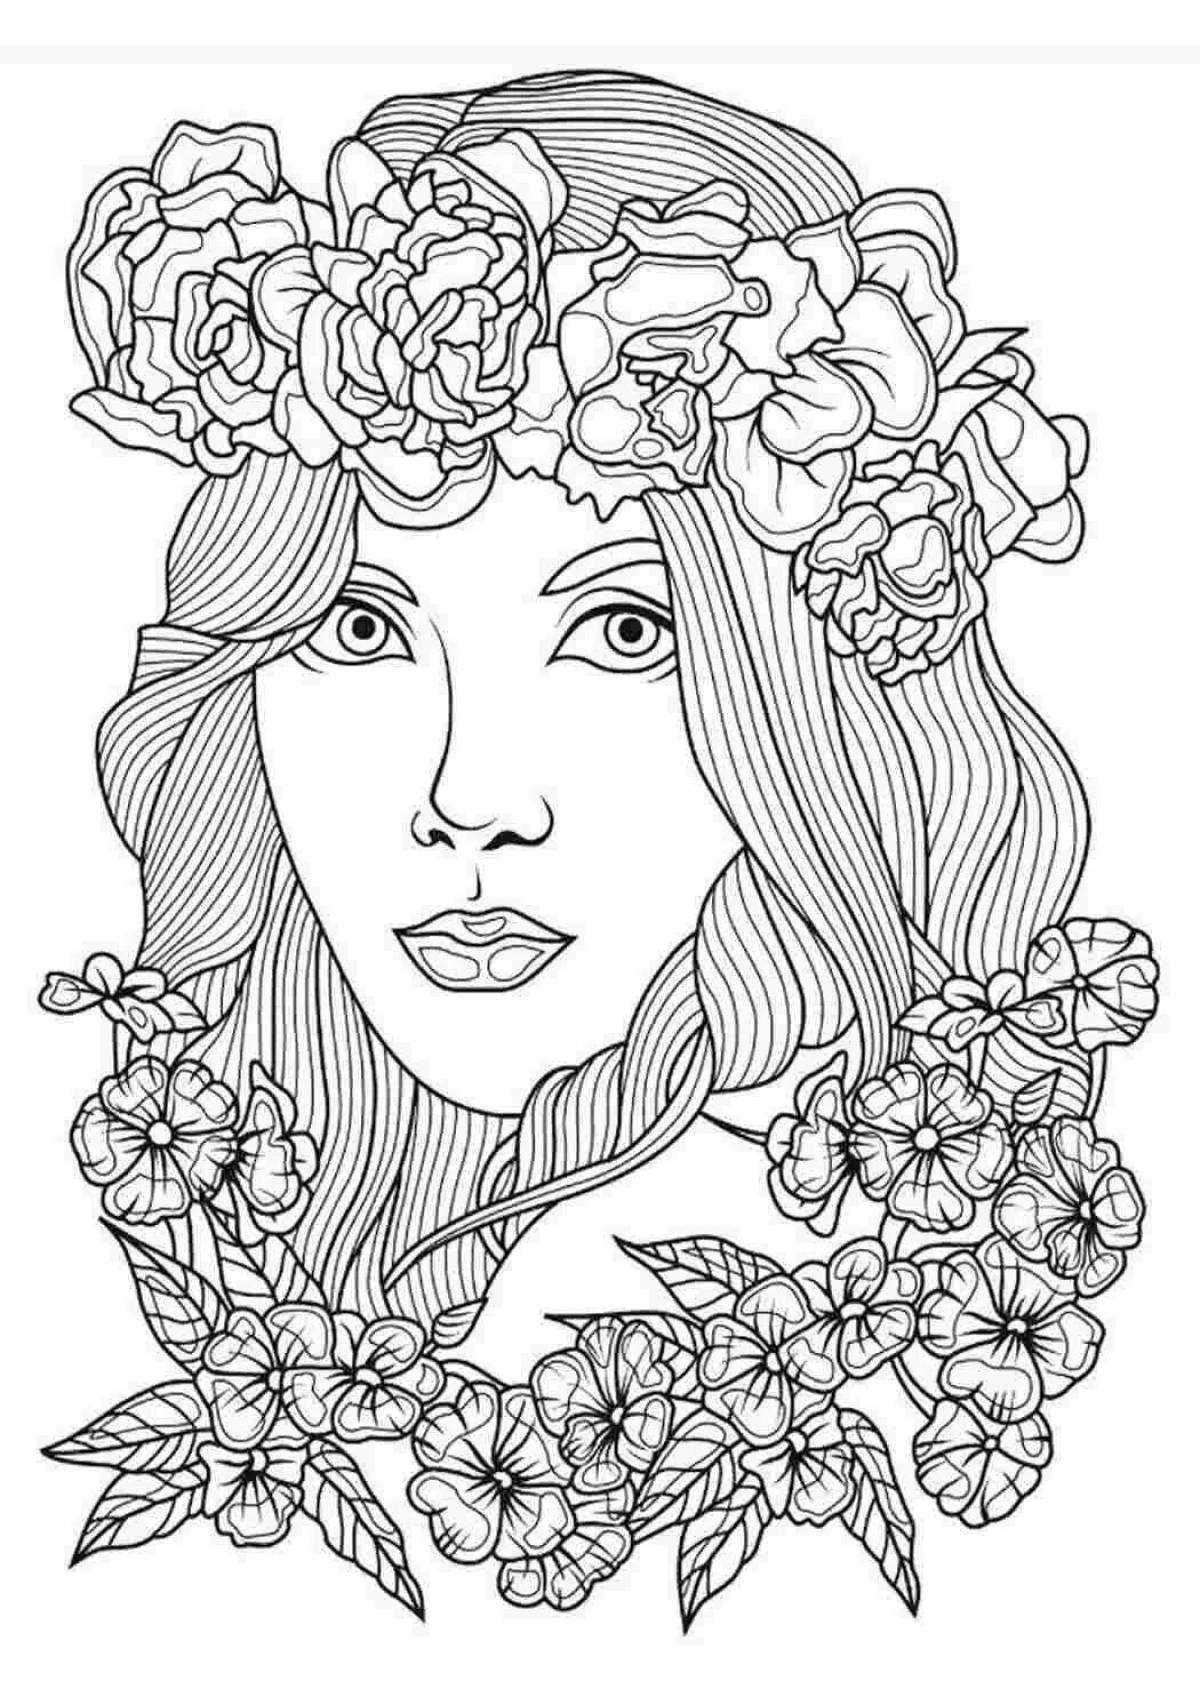 Glowing beauty coloring book